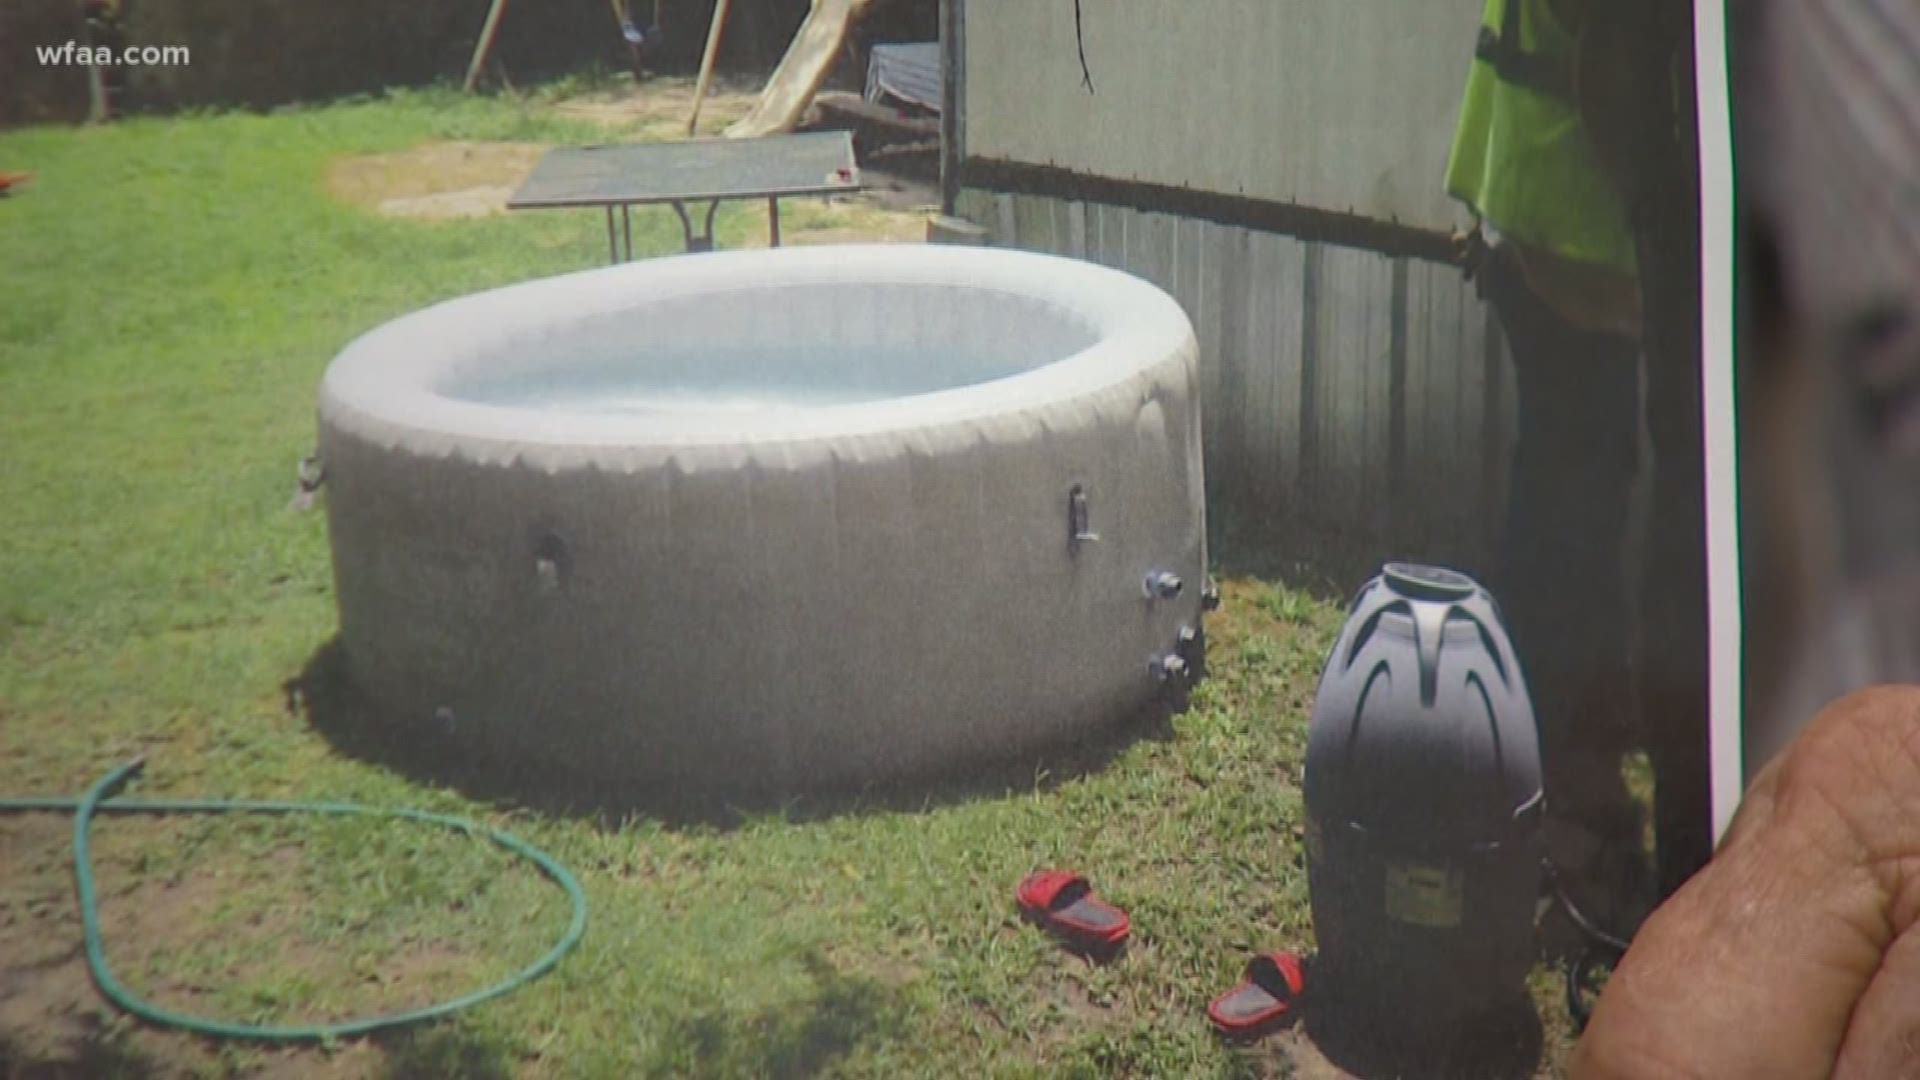 According to the county sheriff, the accident happened as the 6-year-old boy was leaving a small pool outside his house.